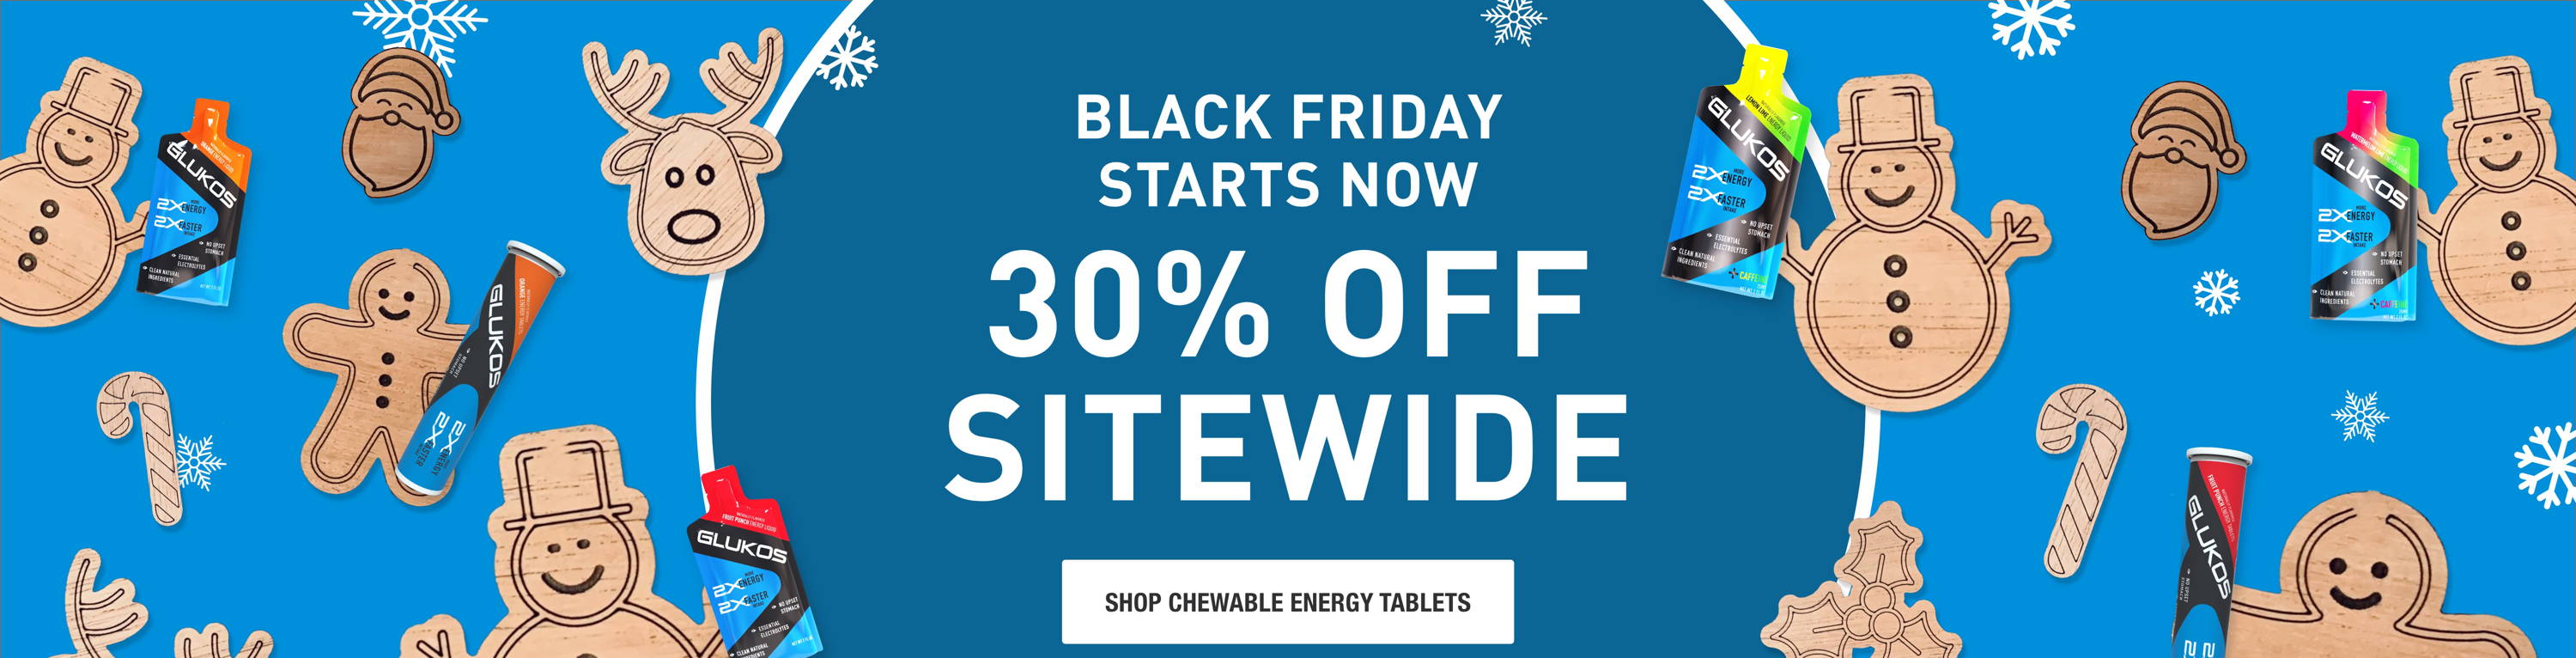 Black Friday Starts Now 30% Off Sitewide Shop Chewable Energy Tablets